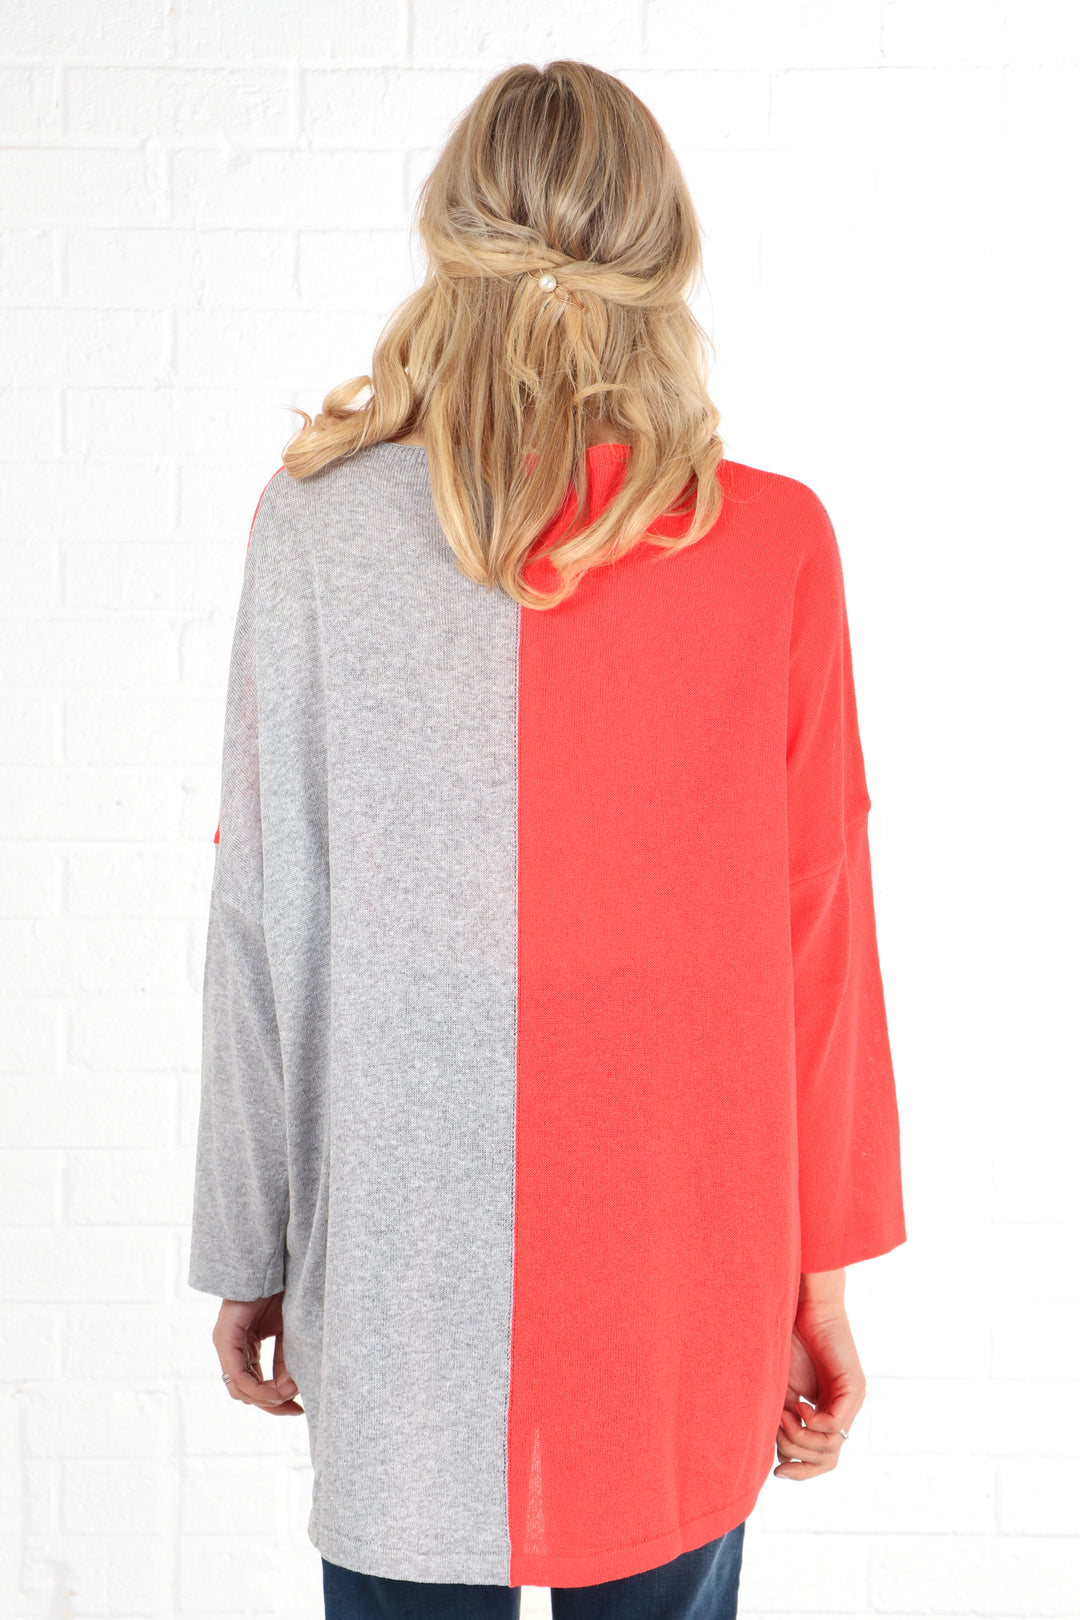 model showing the back of the jumper and its two tone grey and coral pink design